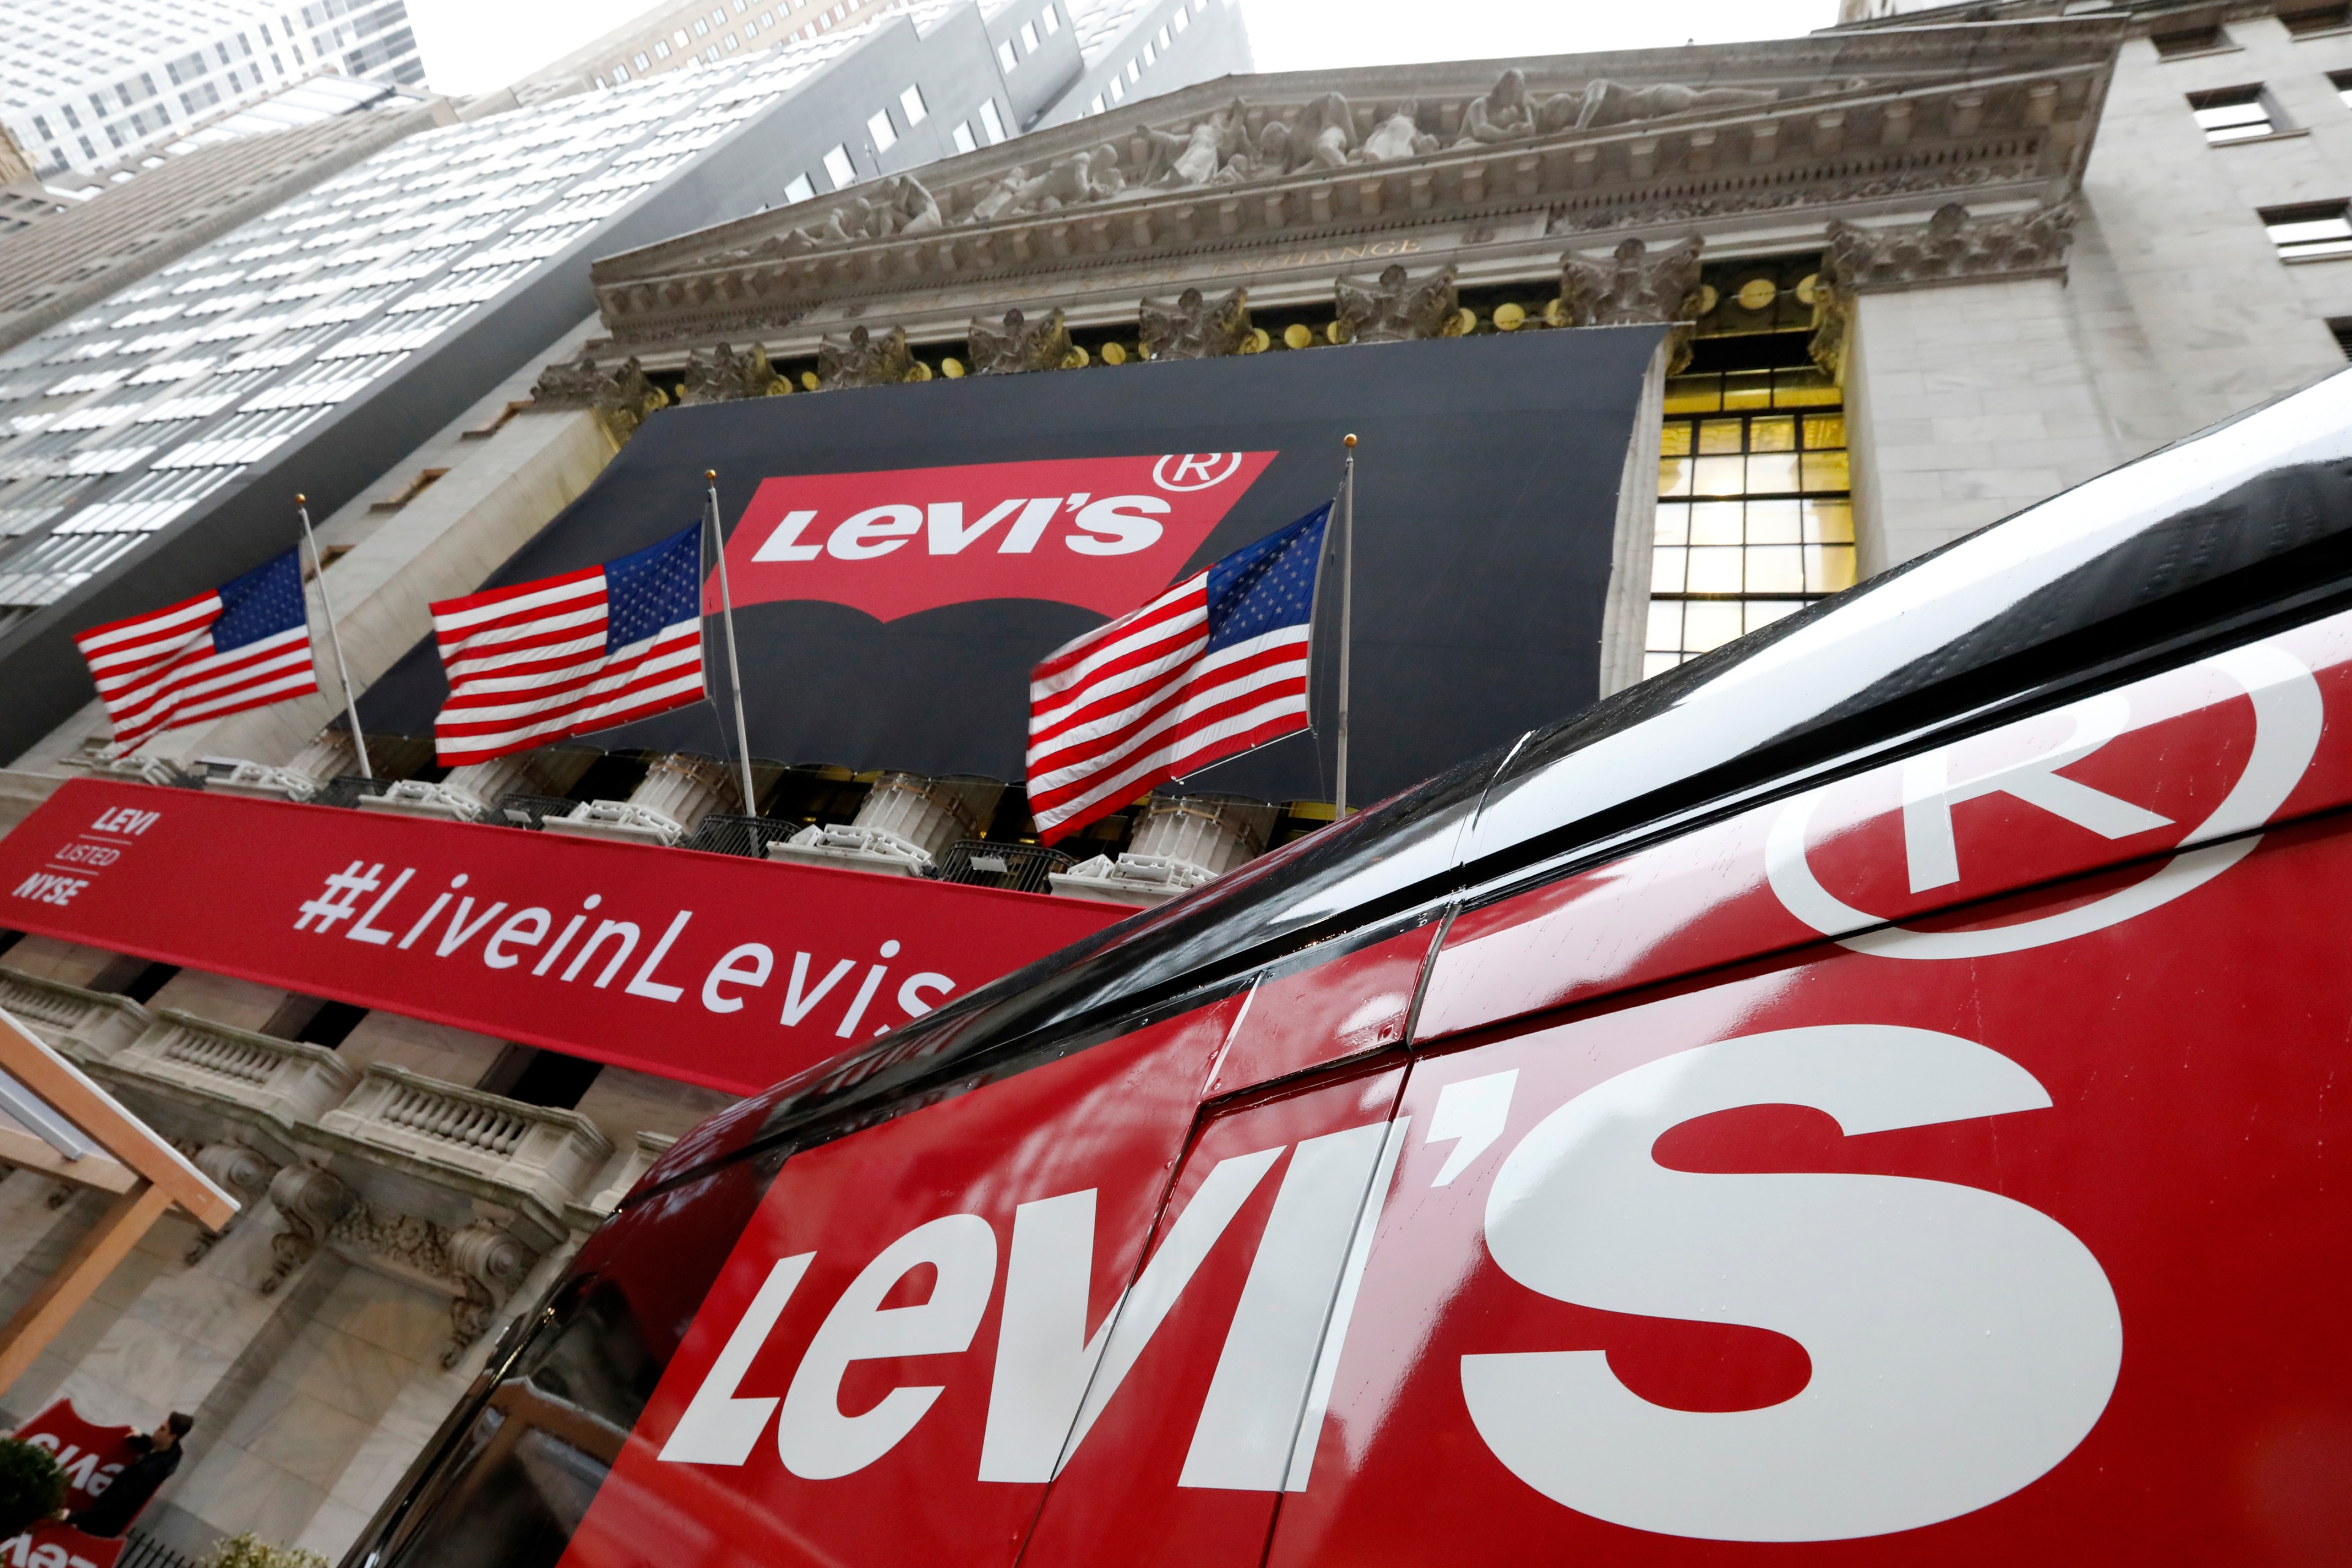 The photo shows a Levi's branded banner, American flags, and a red vehicle with Levi's logos in an outdoor urban setting.